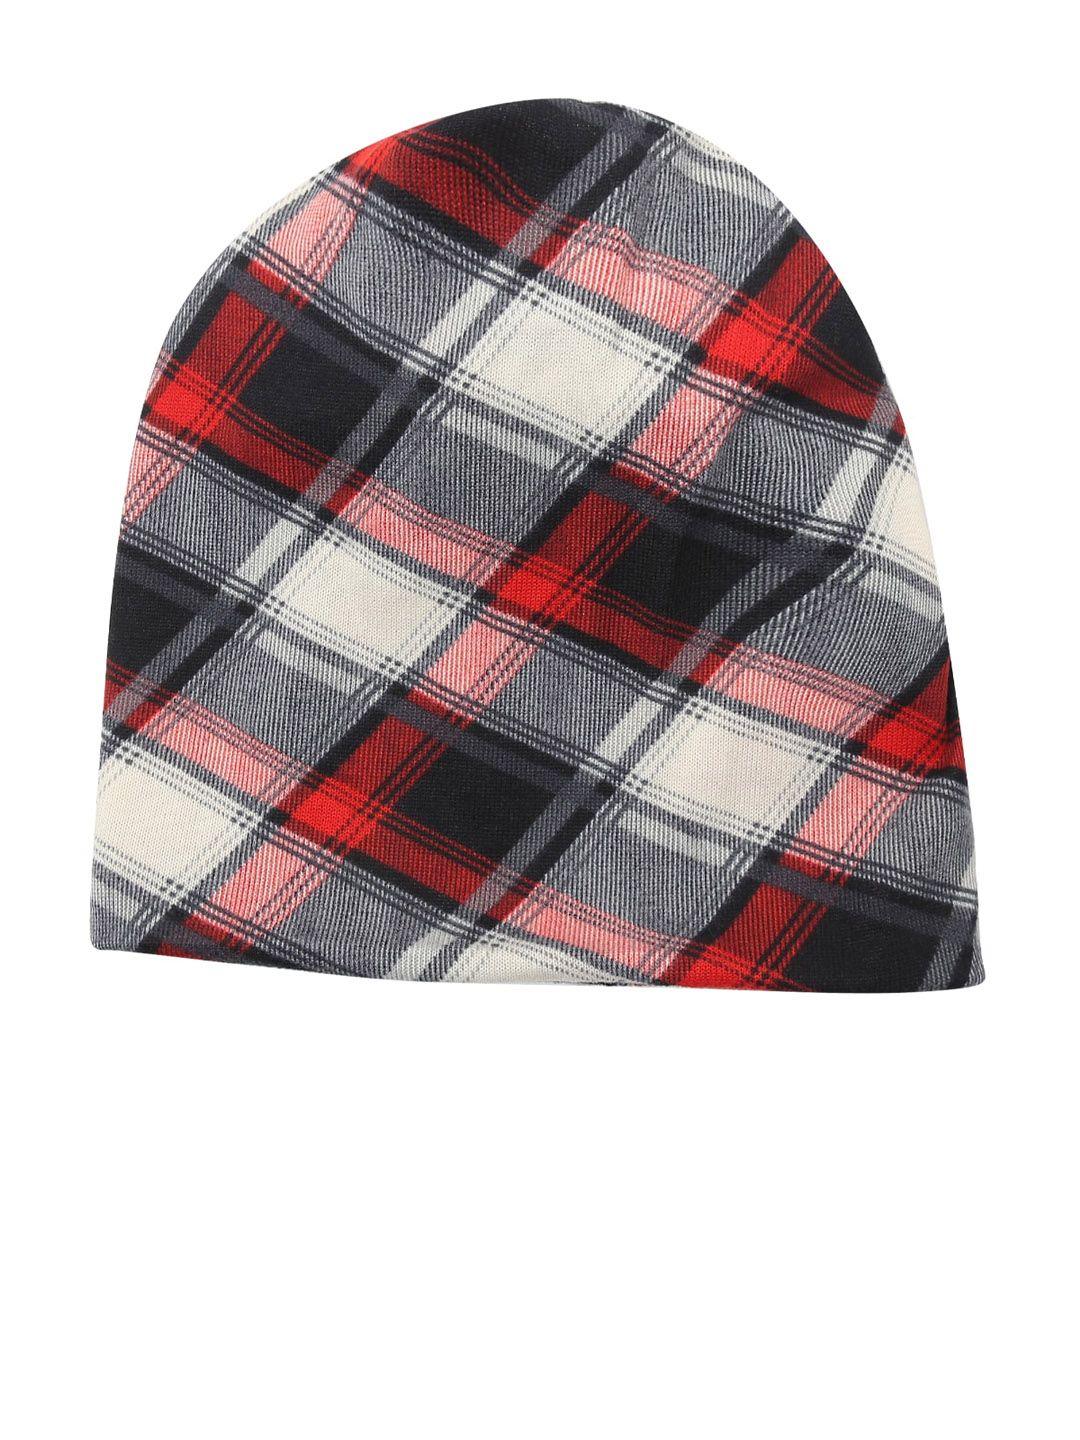 isweven unisex white & black printed beanie